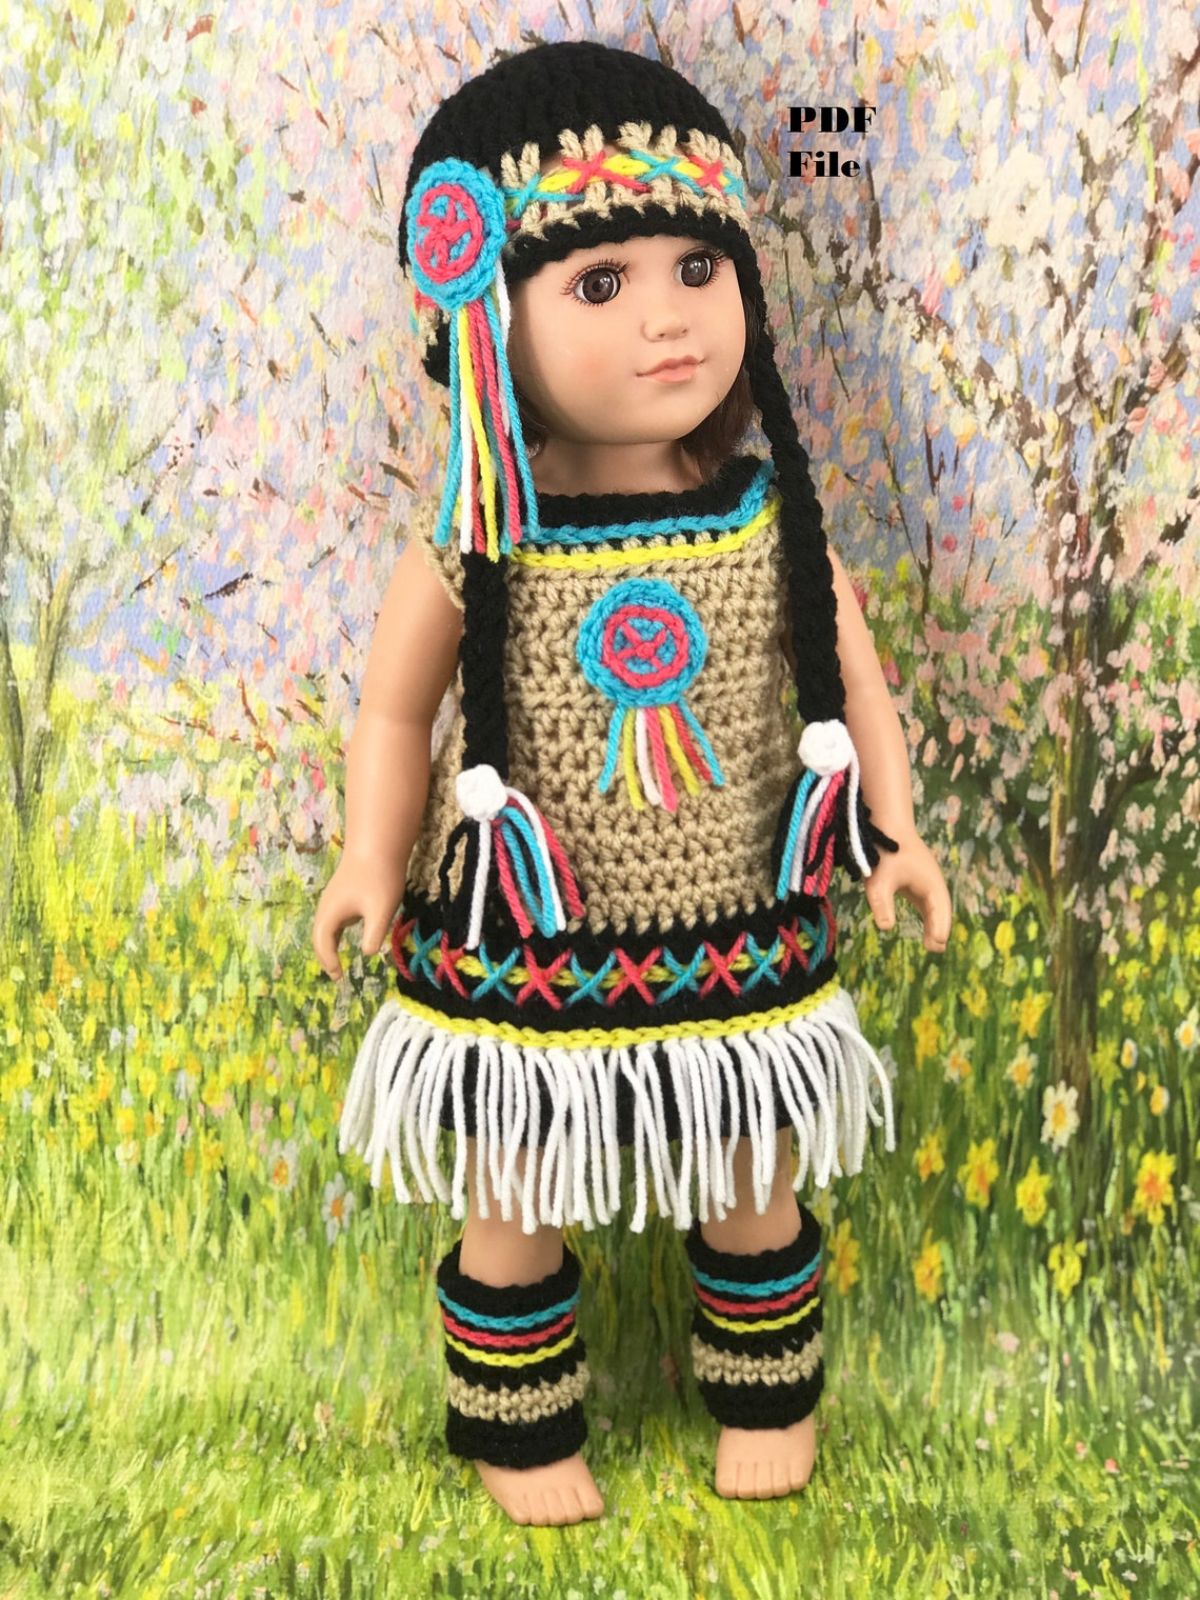 Brunette doll wearing a traditional native crochet dress with white tassels on the bottom with a matching hat and leg warmers.